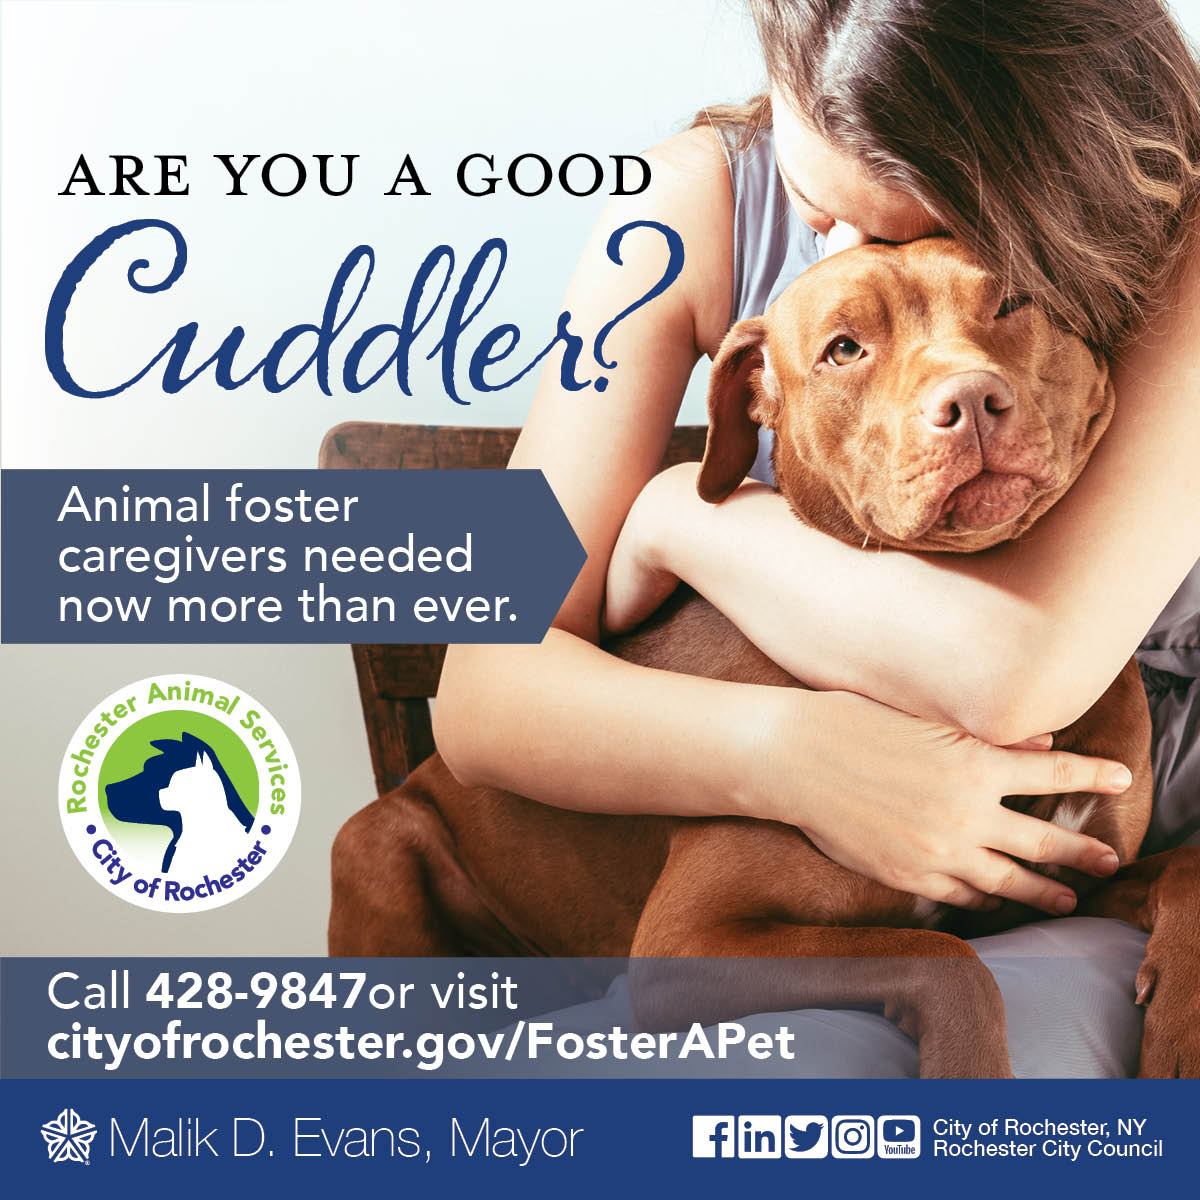 Animal Foster Caregivers Needed Now More Than Ever! 

#adopttoday #animals #caregiversupport #FosterAPet